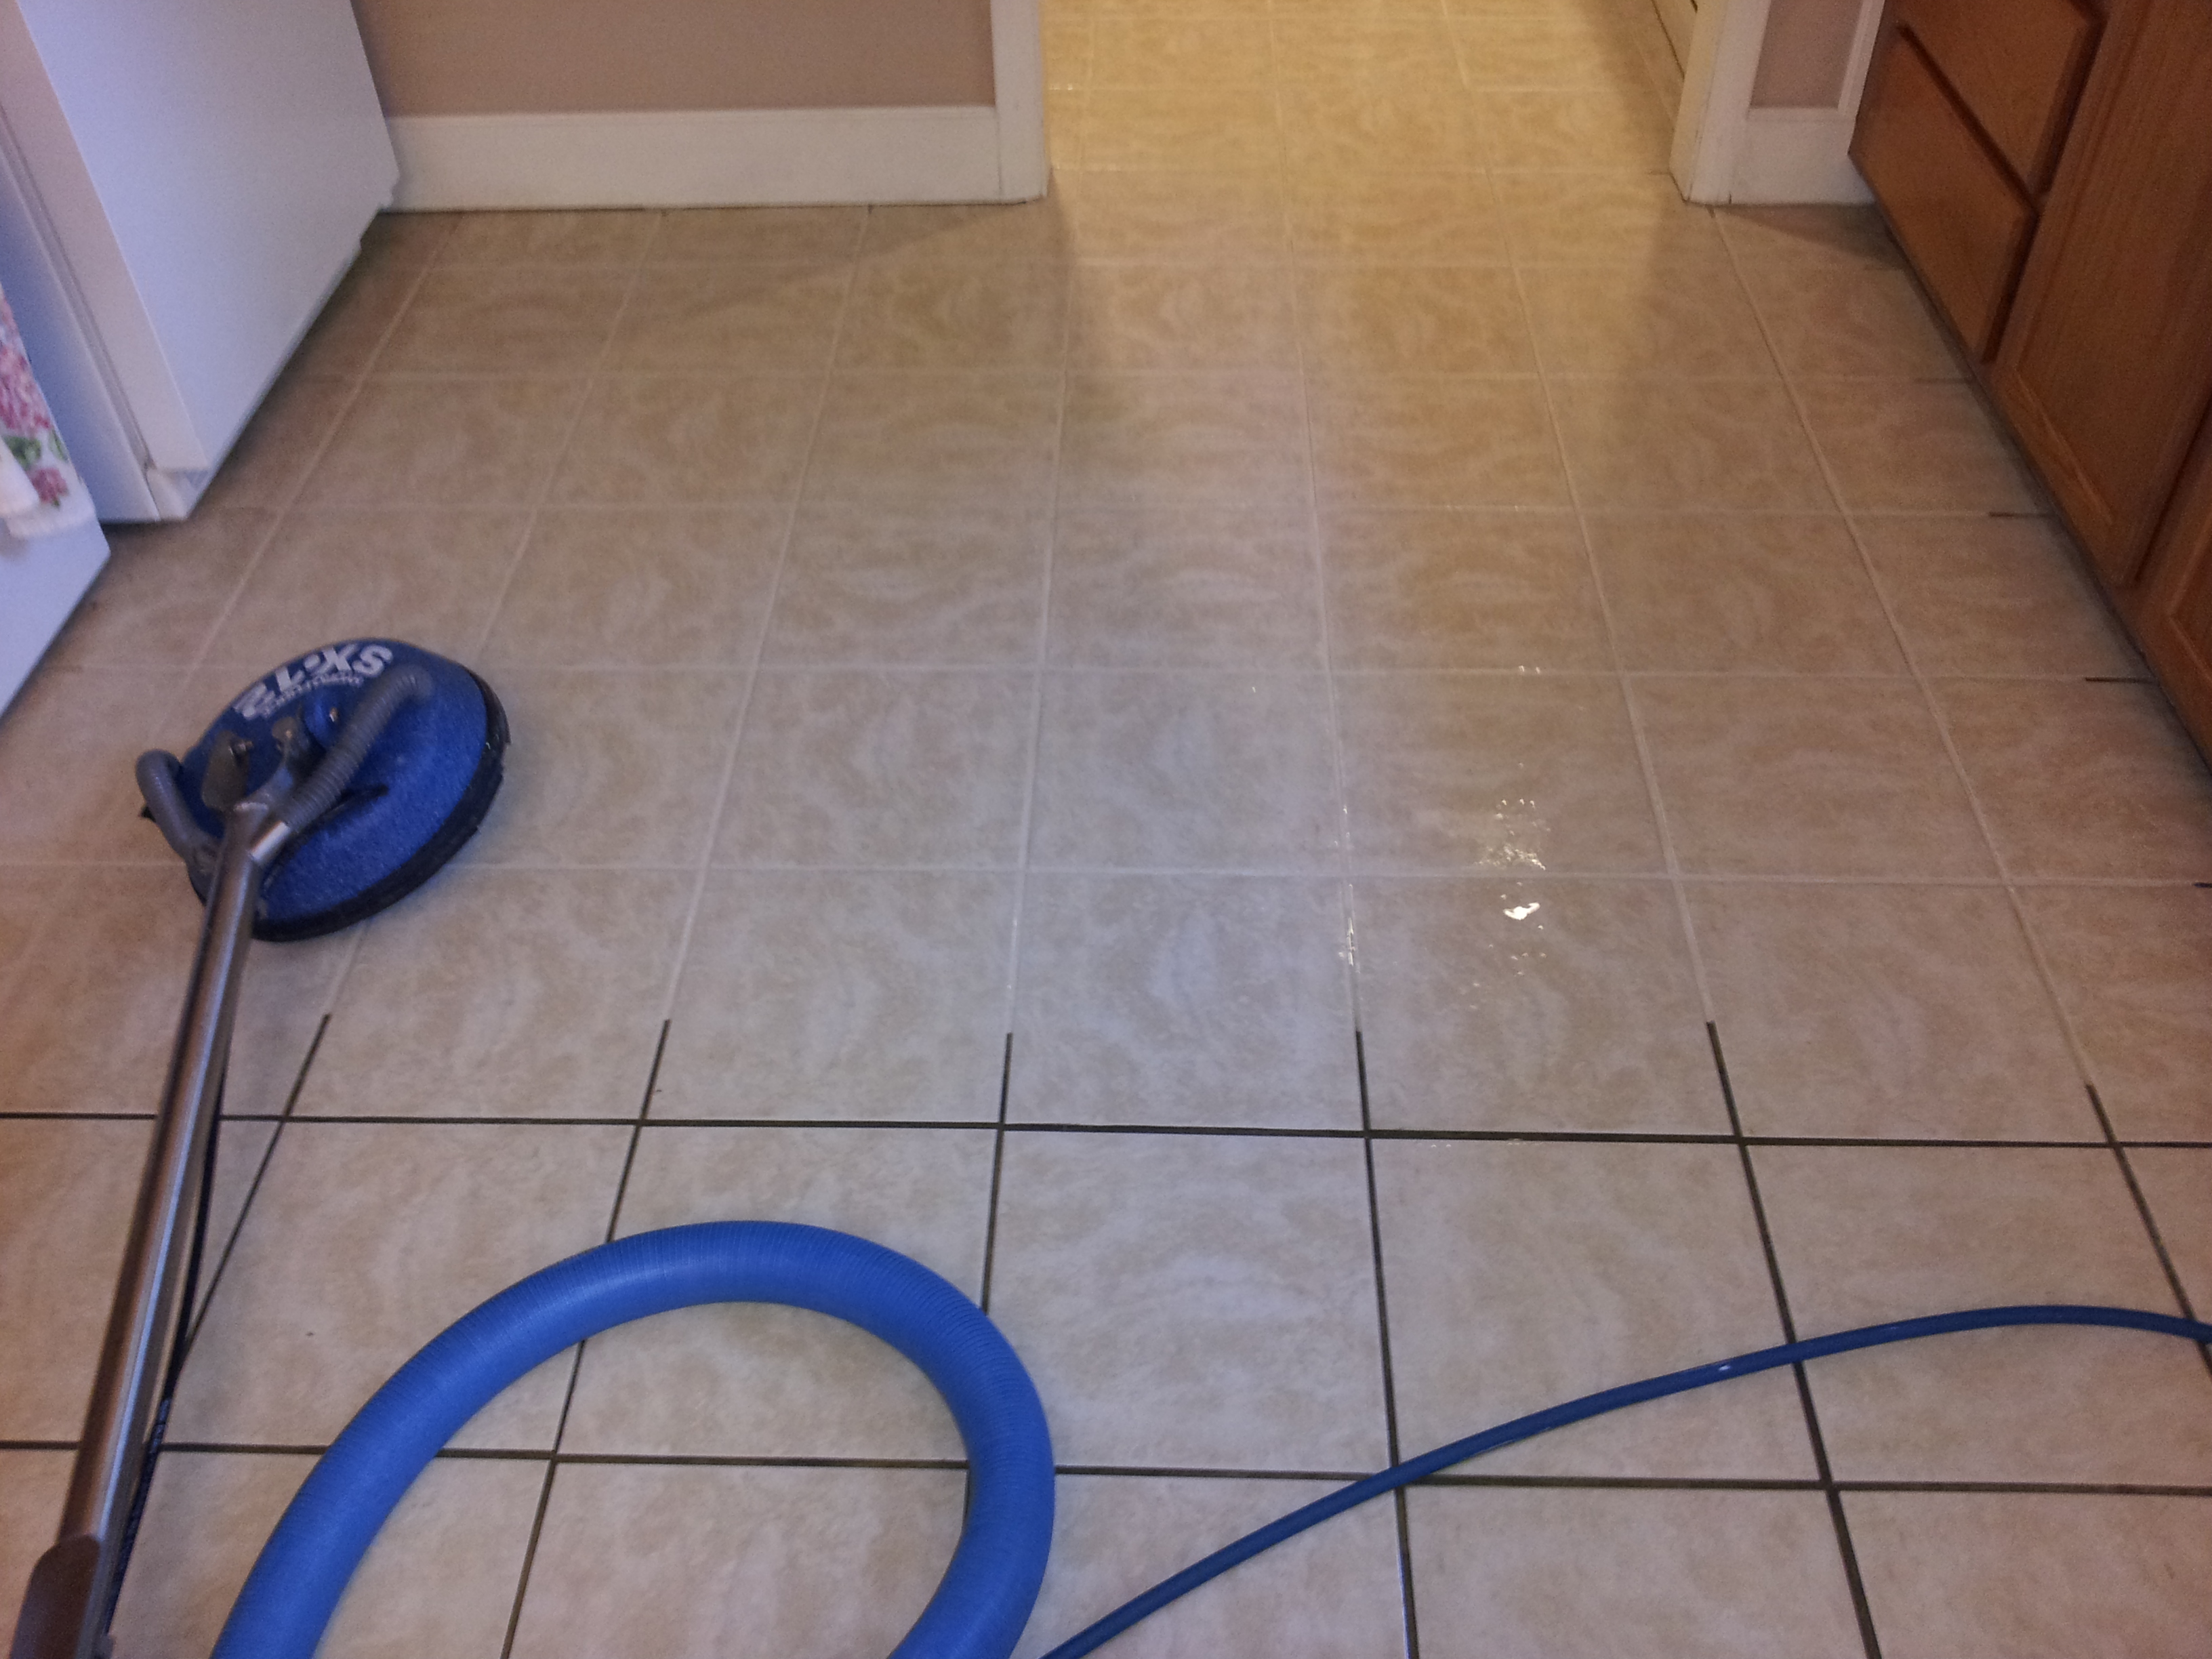 Ultimate Tile Grout Cleaning S, How To Clean The Grout On Bathroom Tile Floors